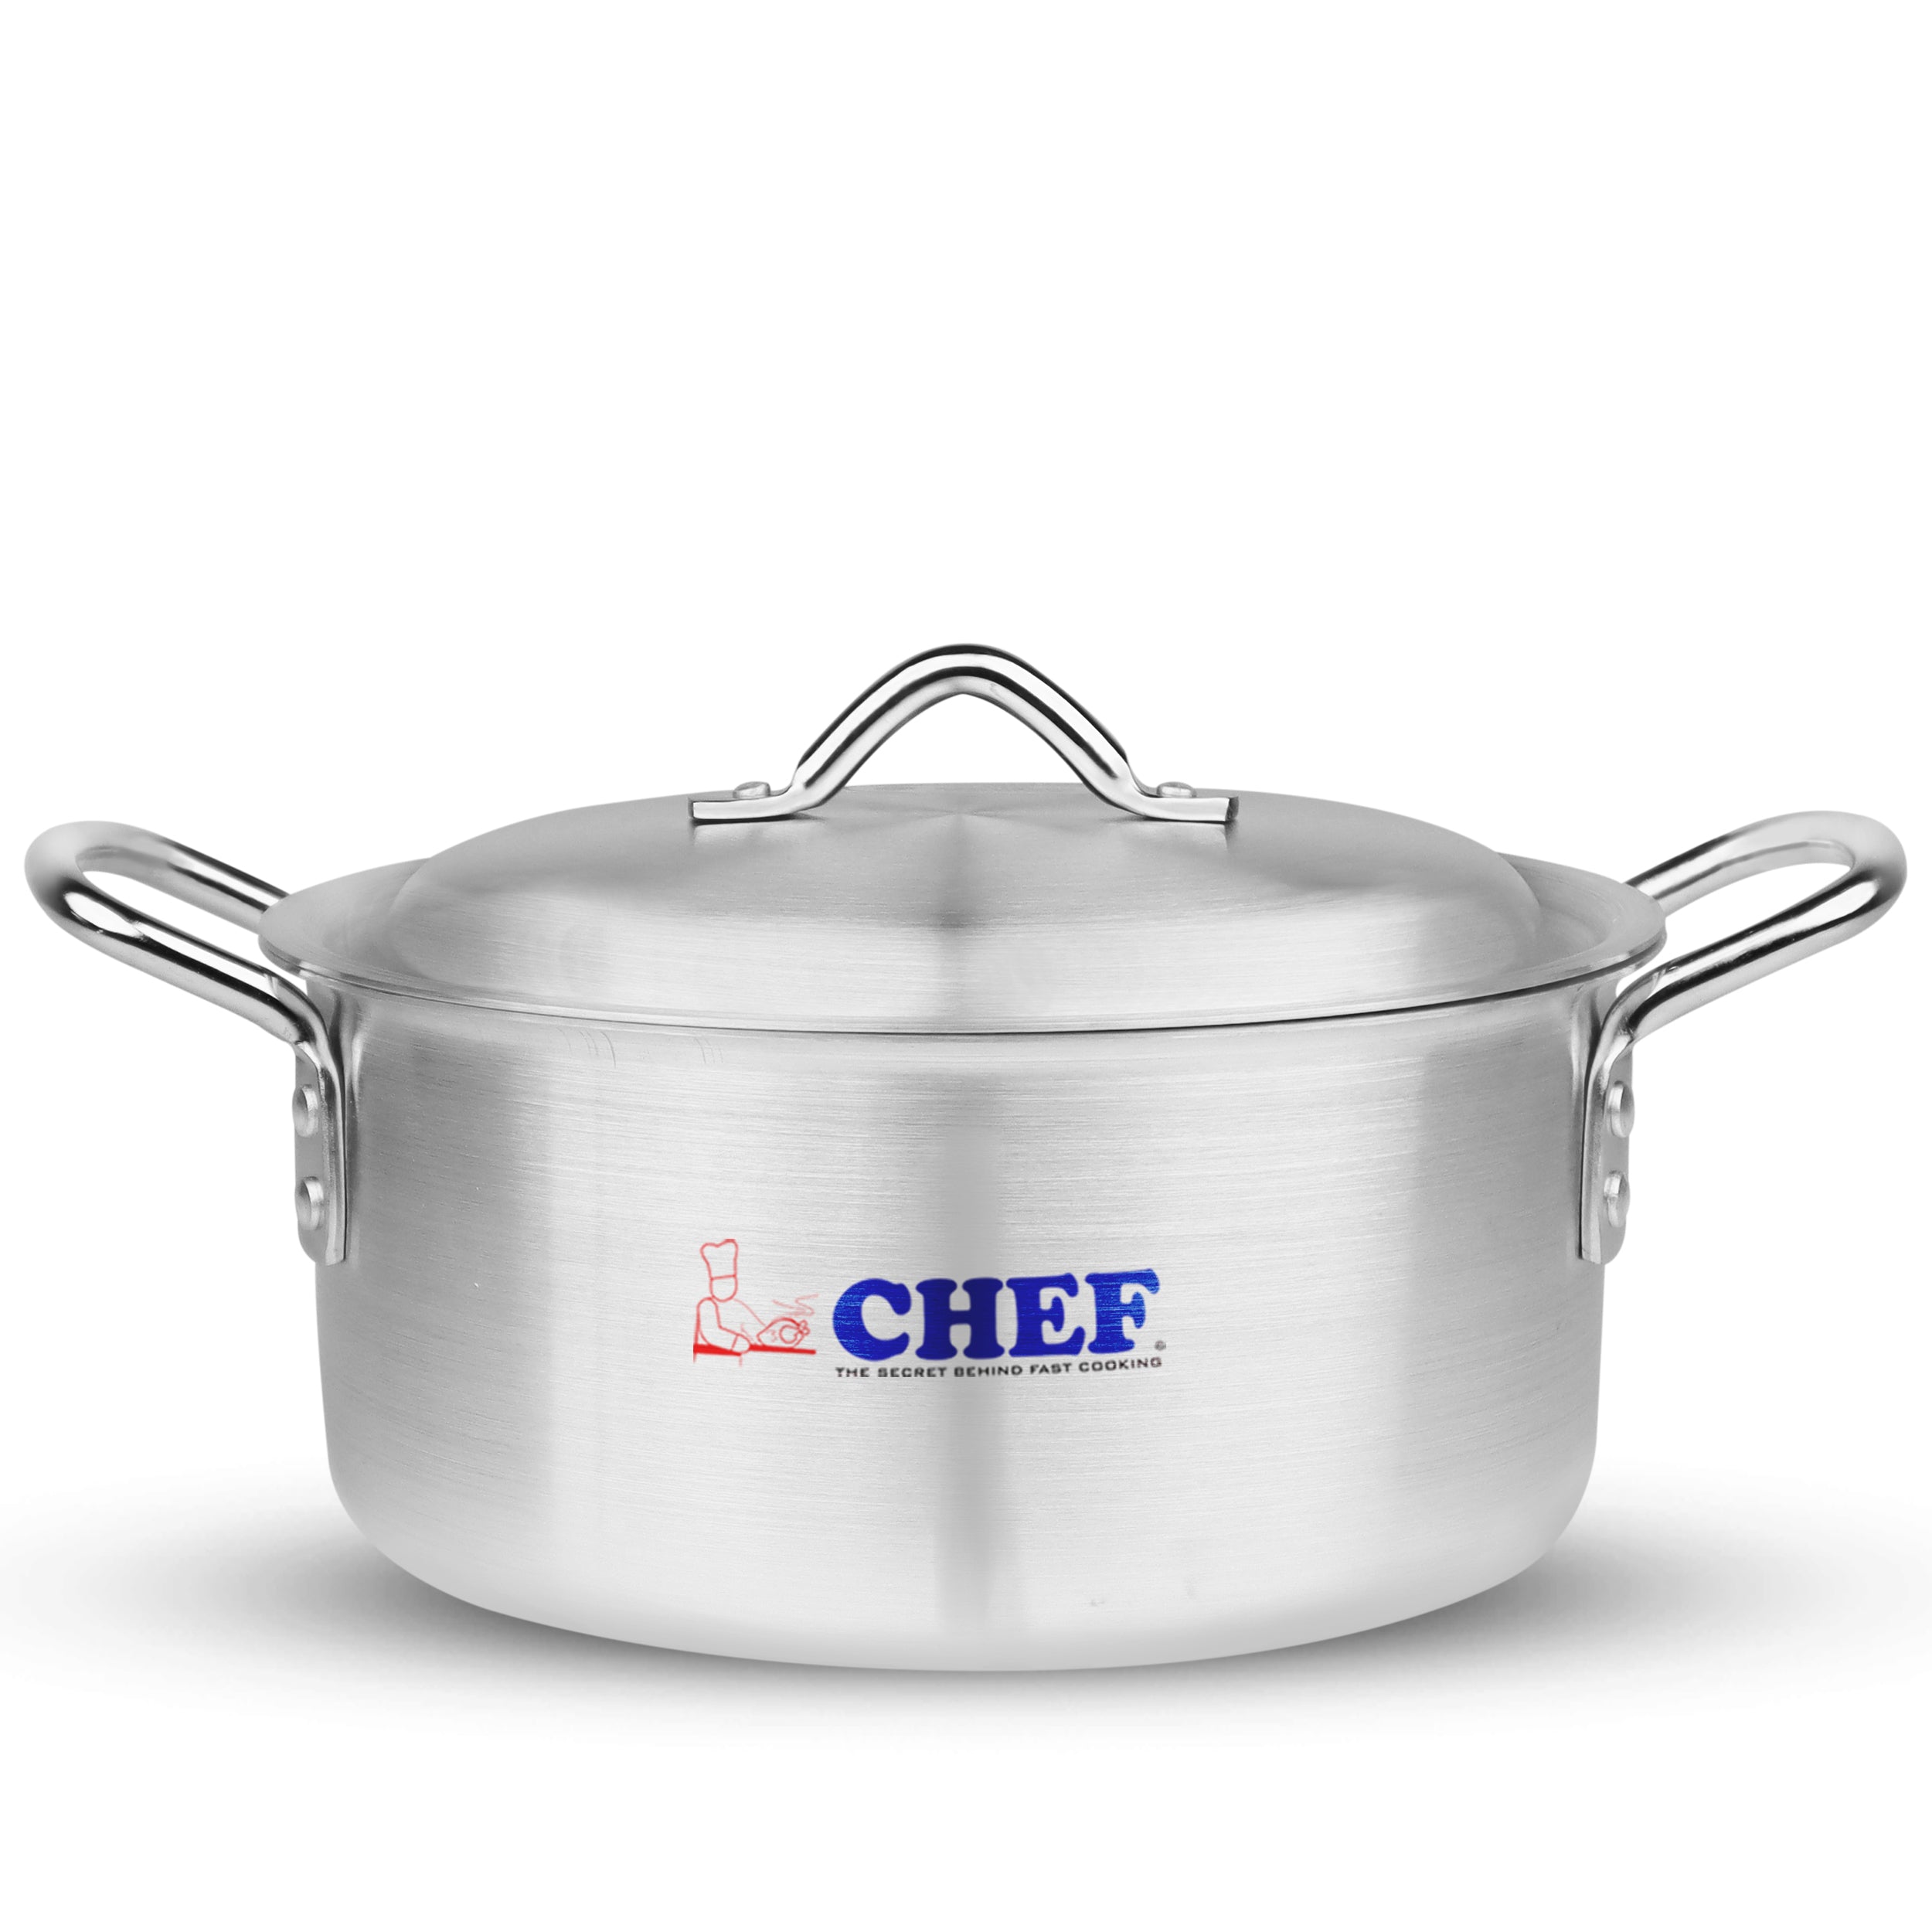 majestic chef best quality aluminum alloy metal 5 pcs casserole set / cooking pan set with silver lid at best price in Pakistan